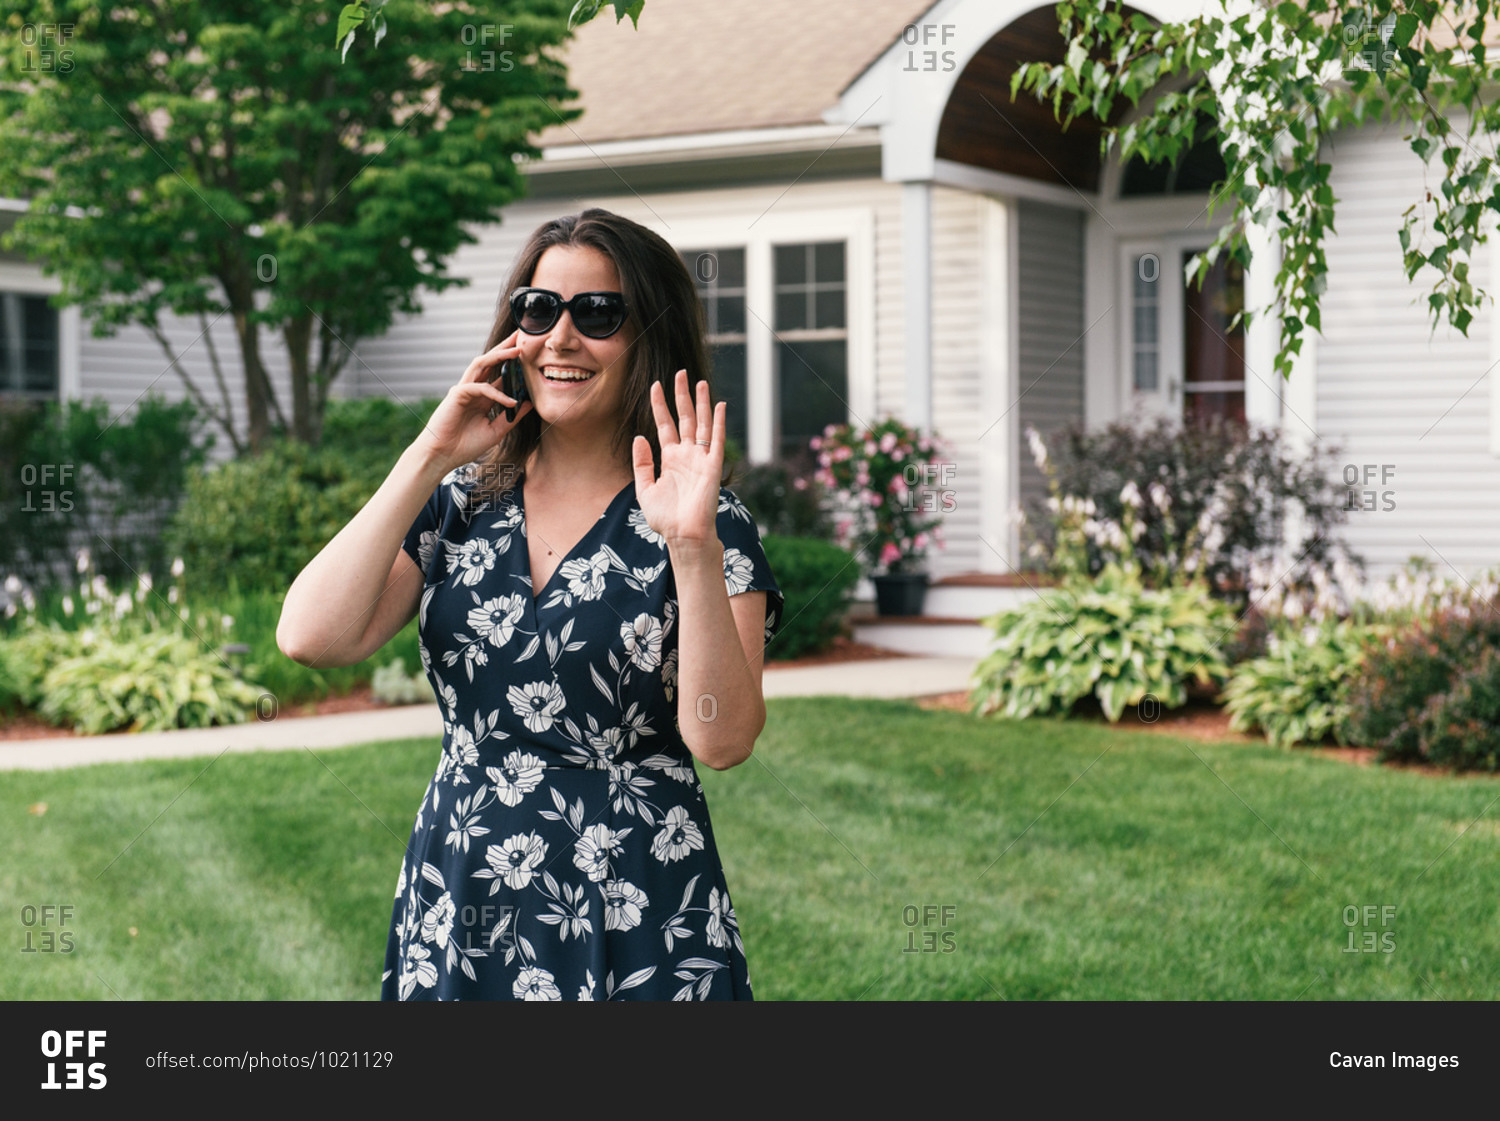 Woman on cell phone waving to neighbors in front of landscaped home